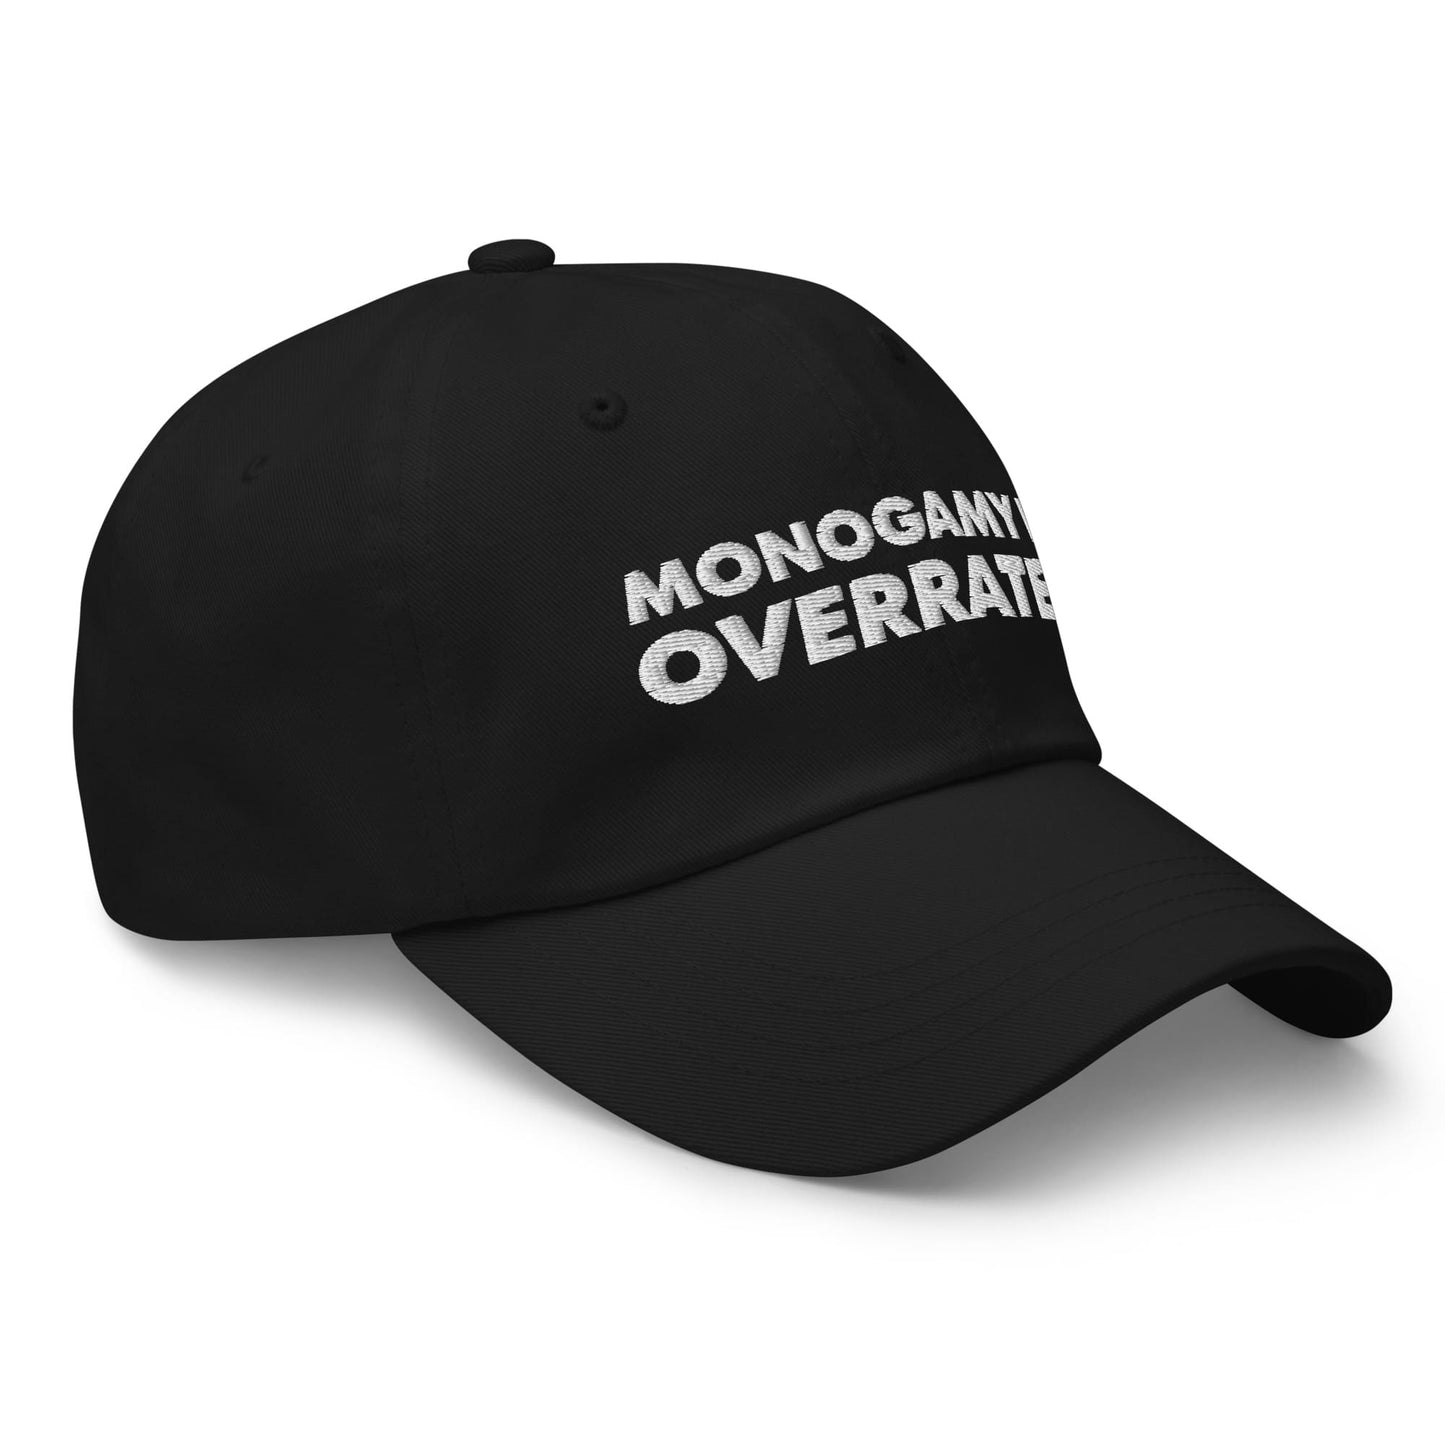 polyamory hat, statement polyamorous pride embroidered cap, right